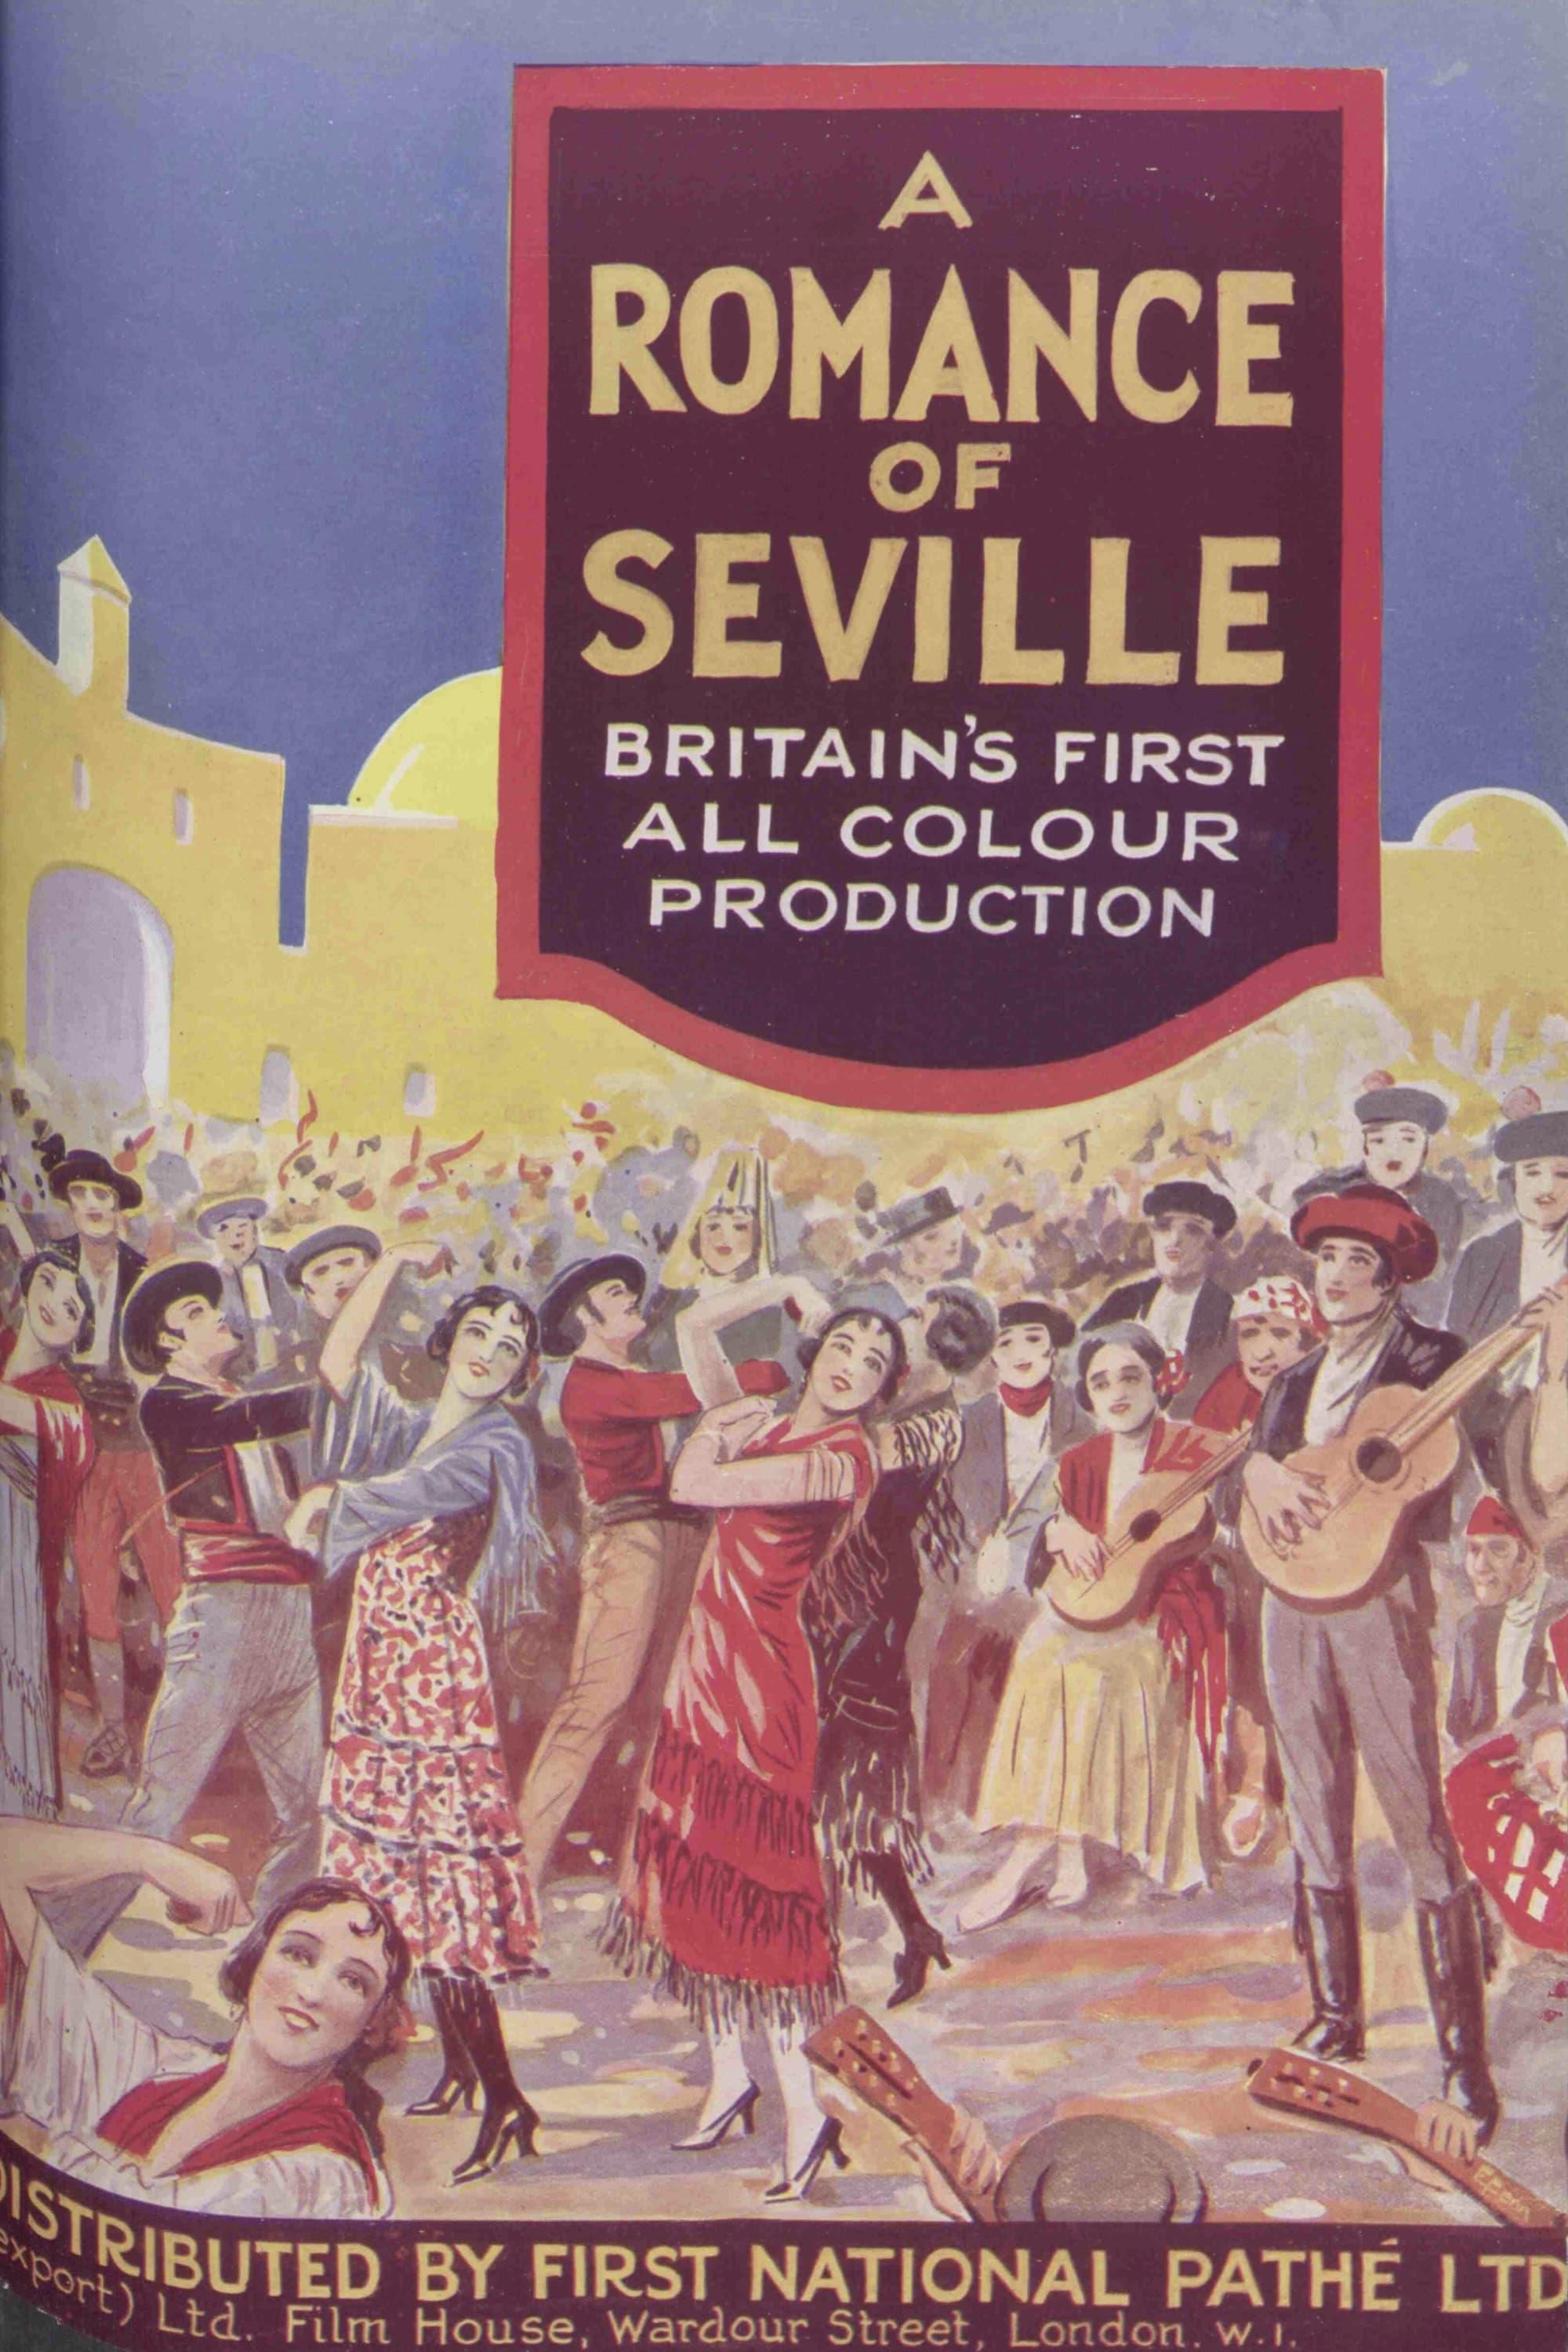 A Romance of Seville poster